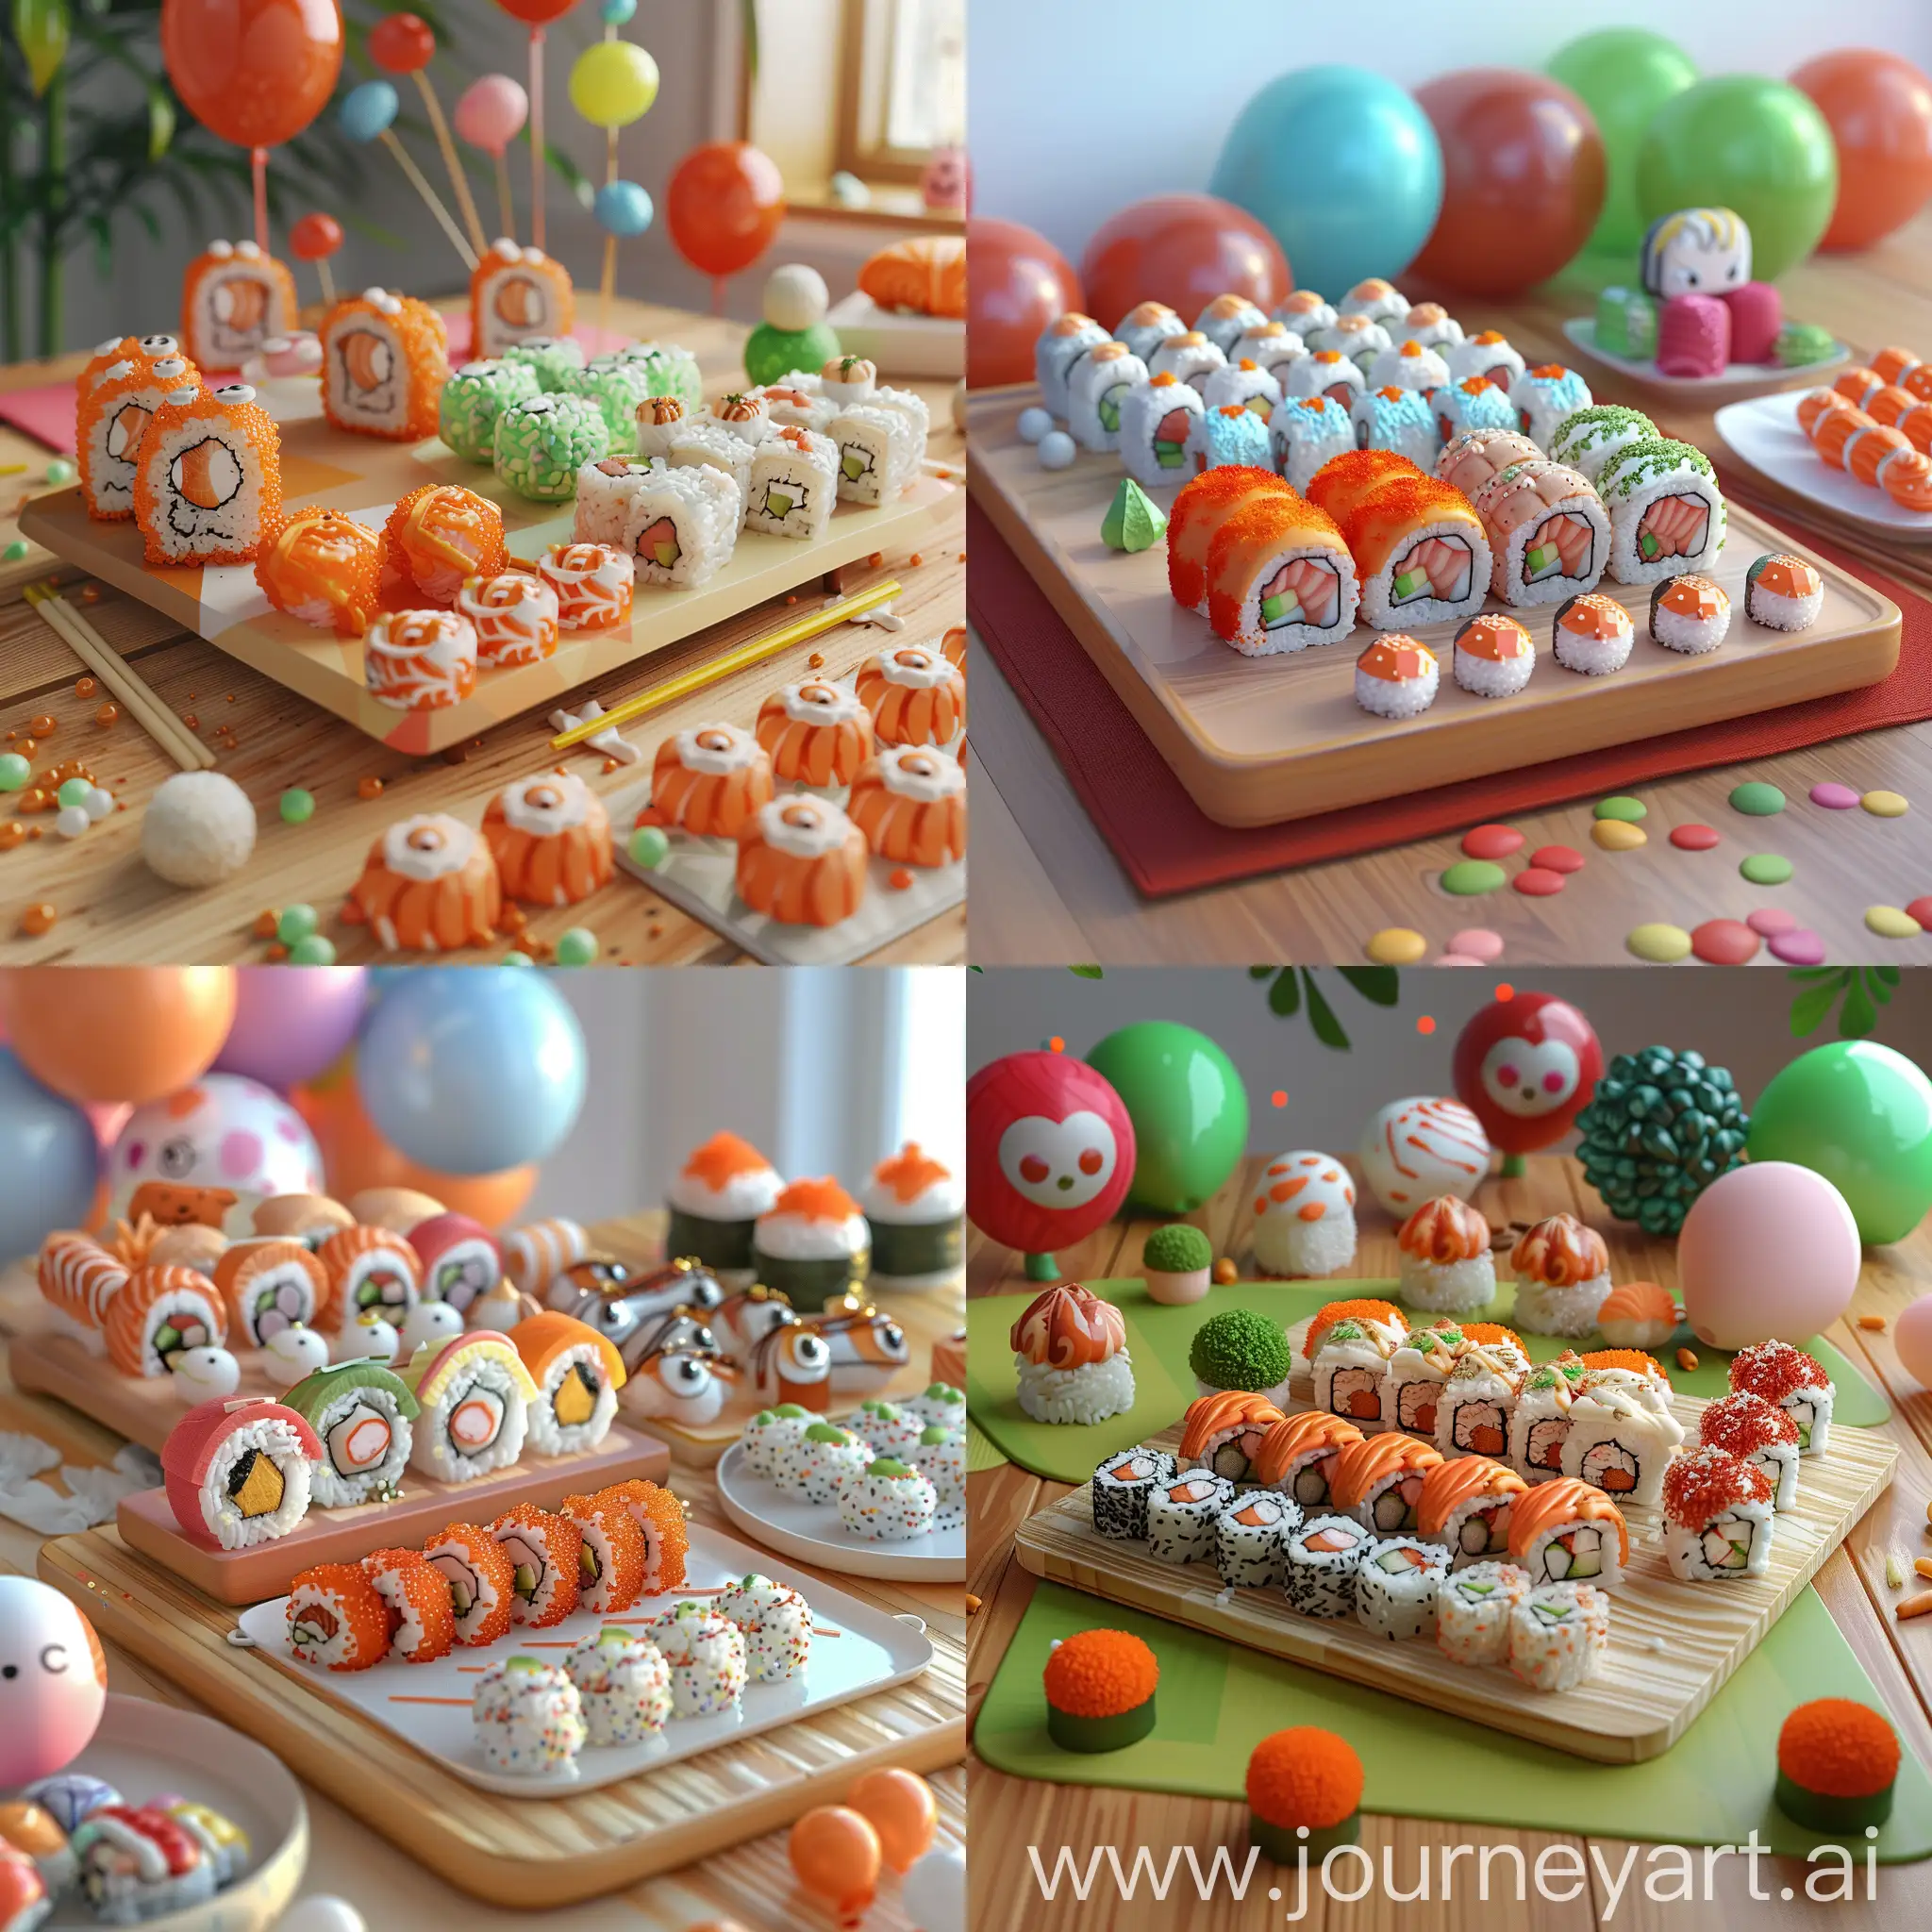 Assorted-Sushi-Rolls-Platter-Hyperrealistic-3D-Render-with-Cute-AnimeInspired-Touches